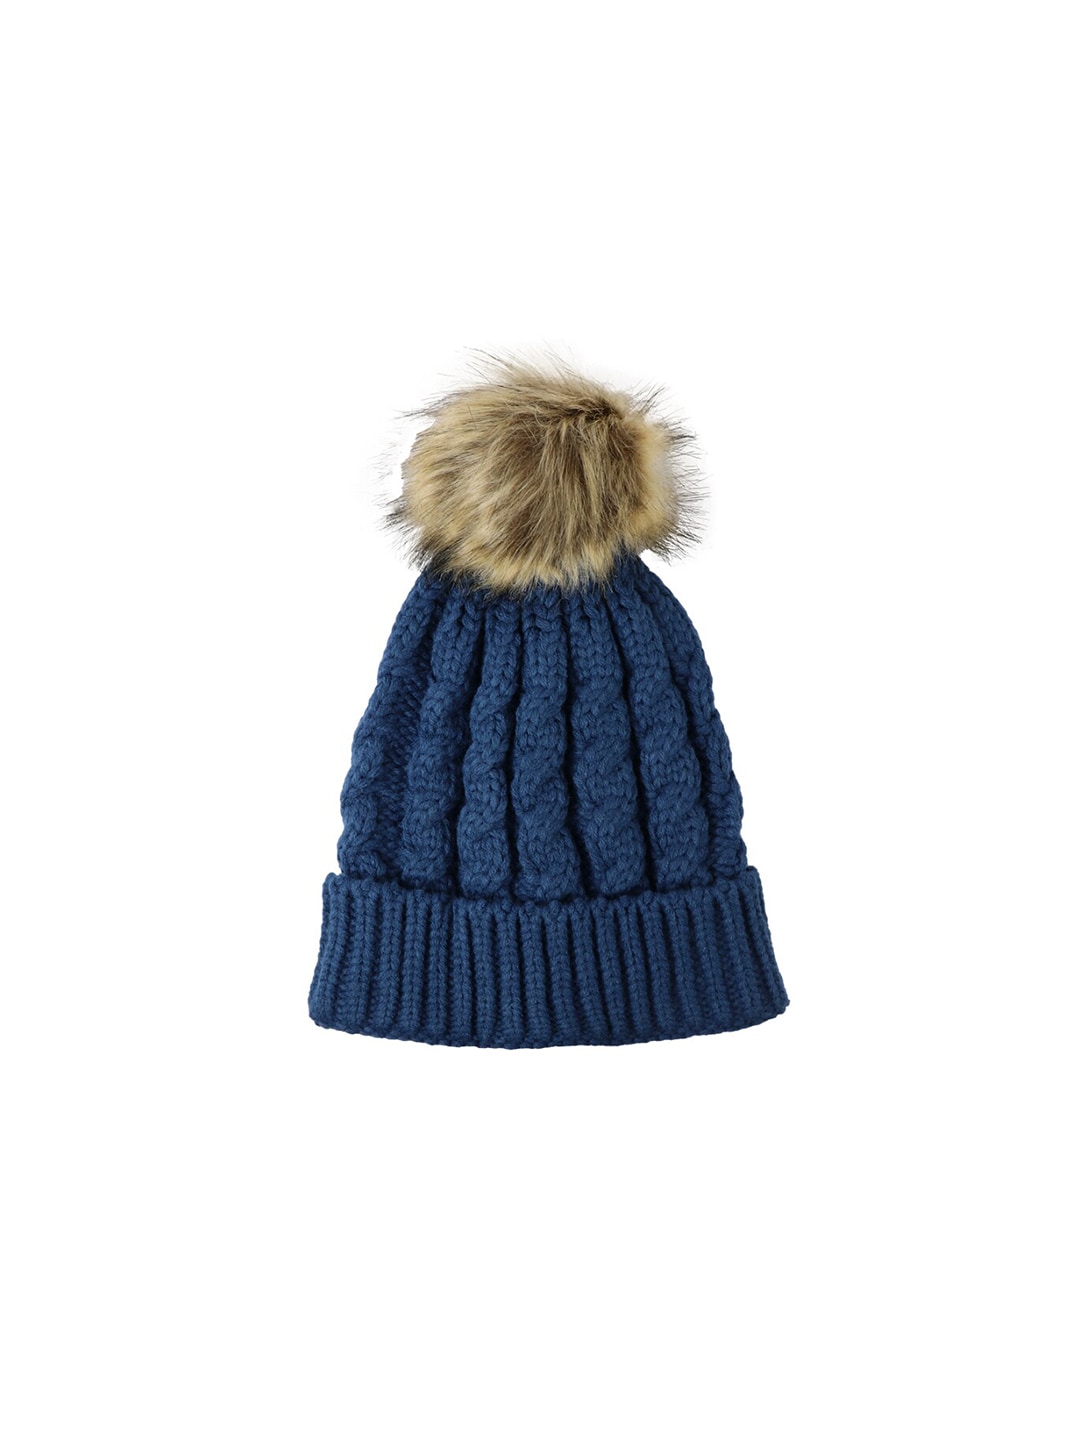 iSWEVEN Adult Blue & Tan Beanie Price in India